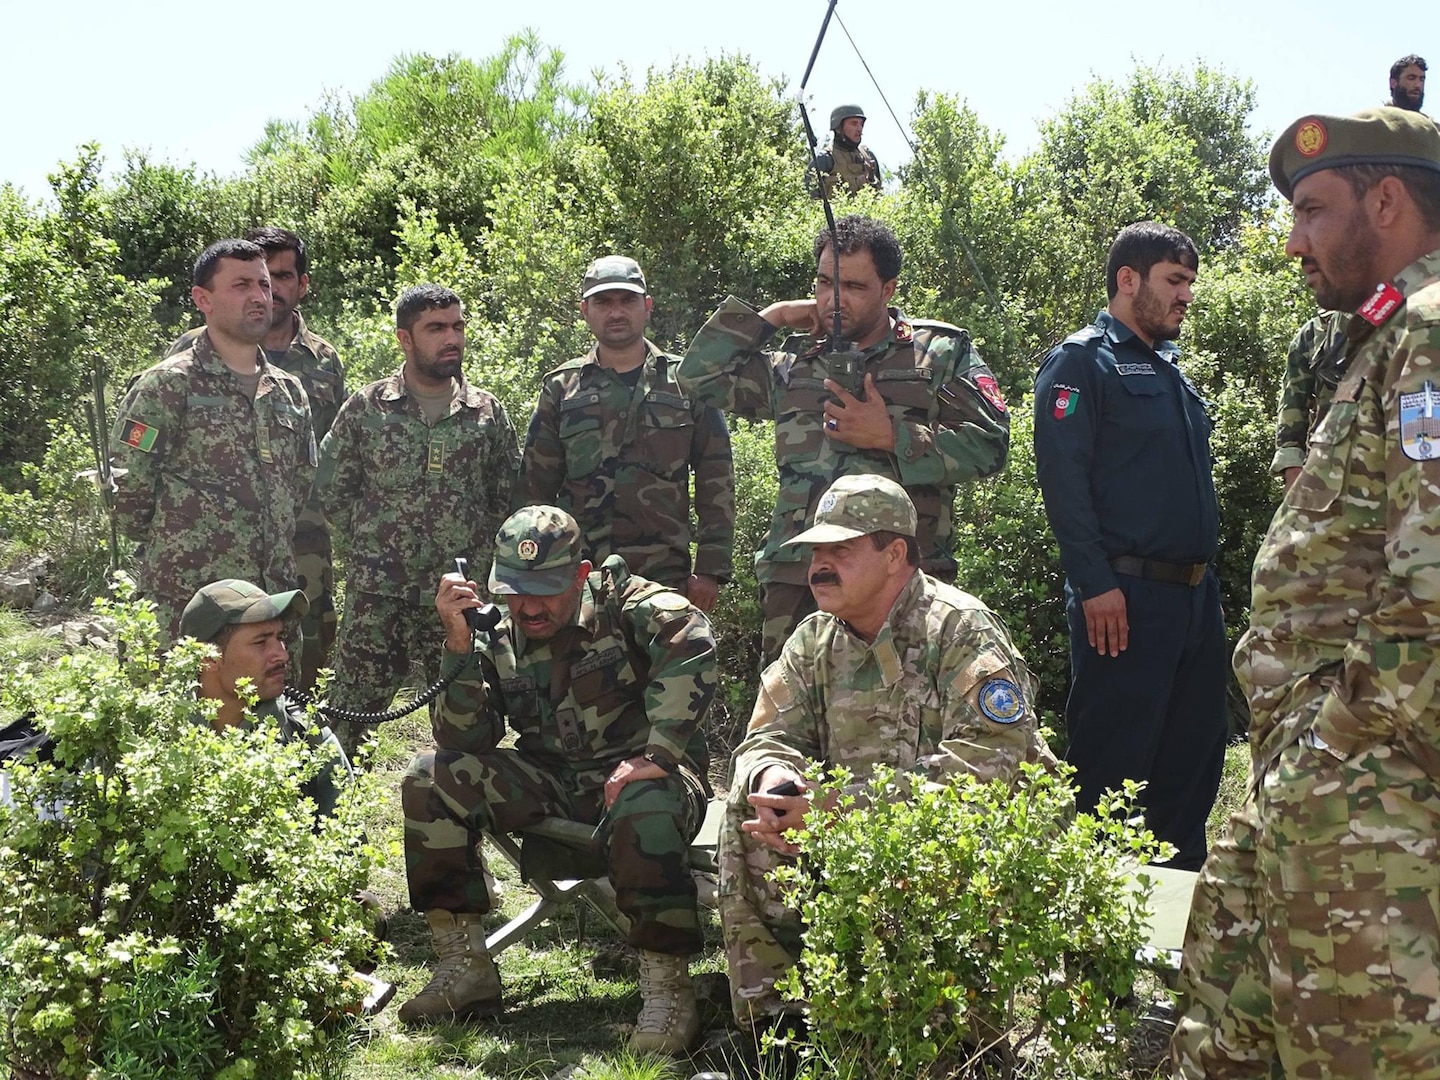 Brig. Gen. Abdul Wasea Milad,(Seated left) Commander of ANA 203rd “Thunder” Corps and Maj. Gen. Asadullah Shirzad, (Seated right) Commander of ANP 303rd Police Headquarters Zone  inspects operations May 21 in Dand-e-Patan district of southeastern Afghanistan during operations to secure routes through the Spin Ghar “White Mountain” range. (Afghanistan National Police photo provided by 303rd Police Zone PAO.)